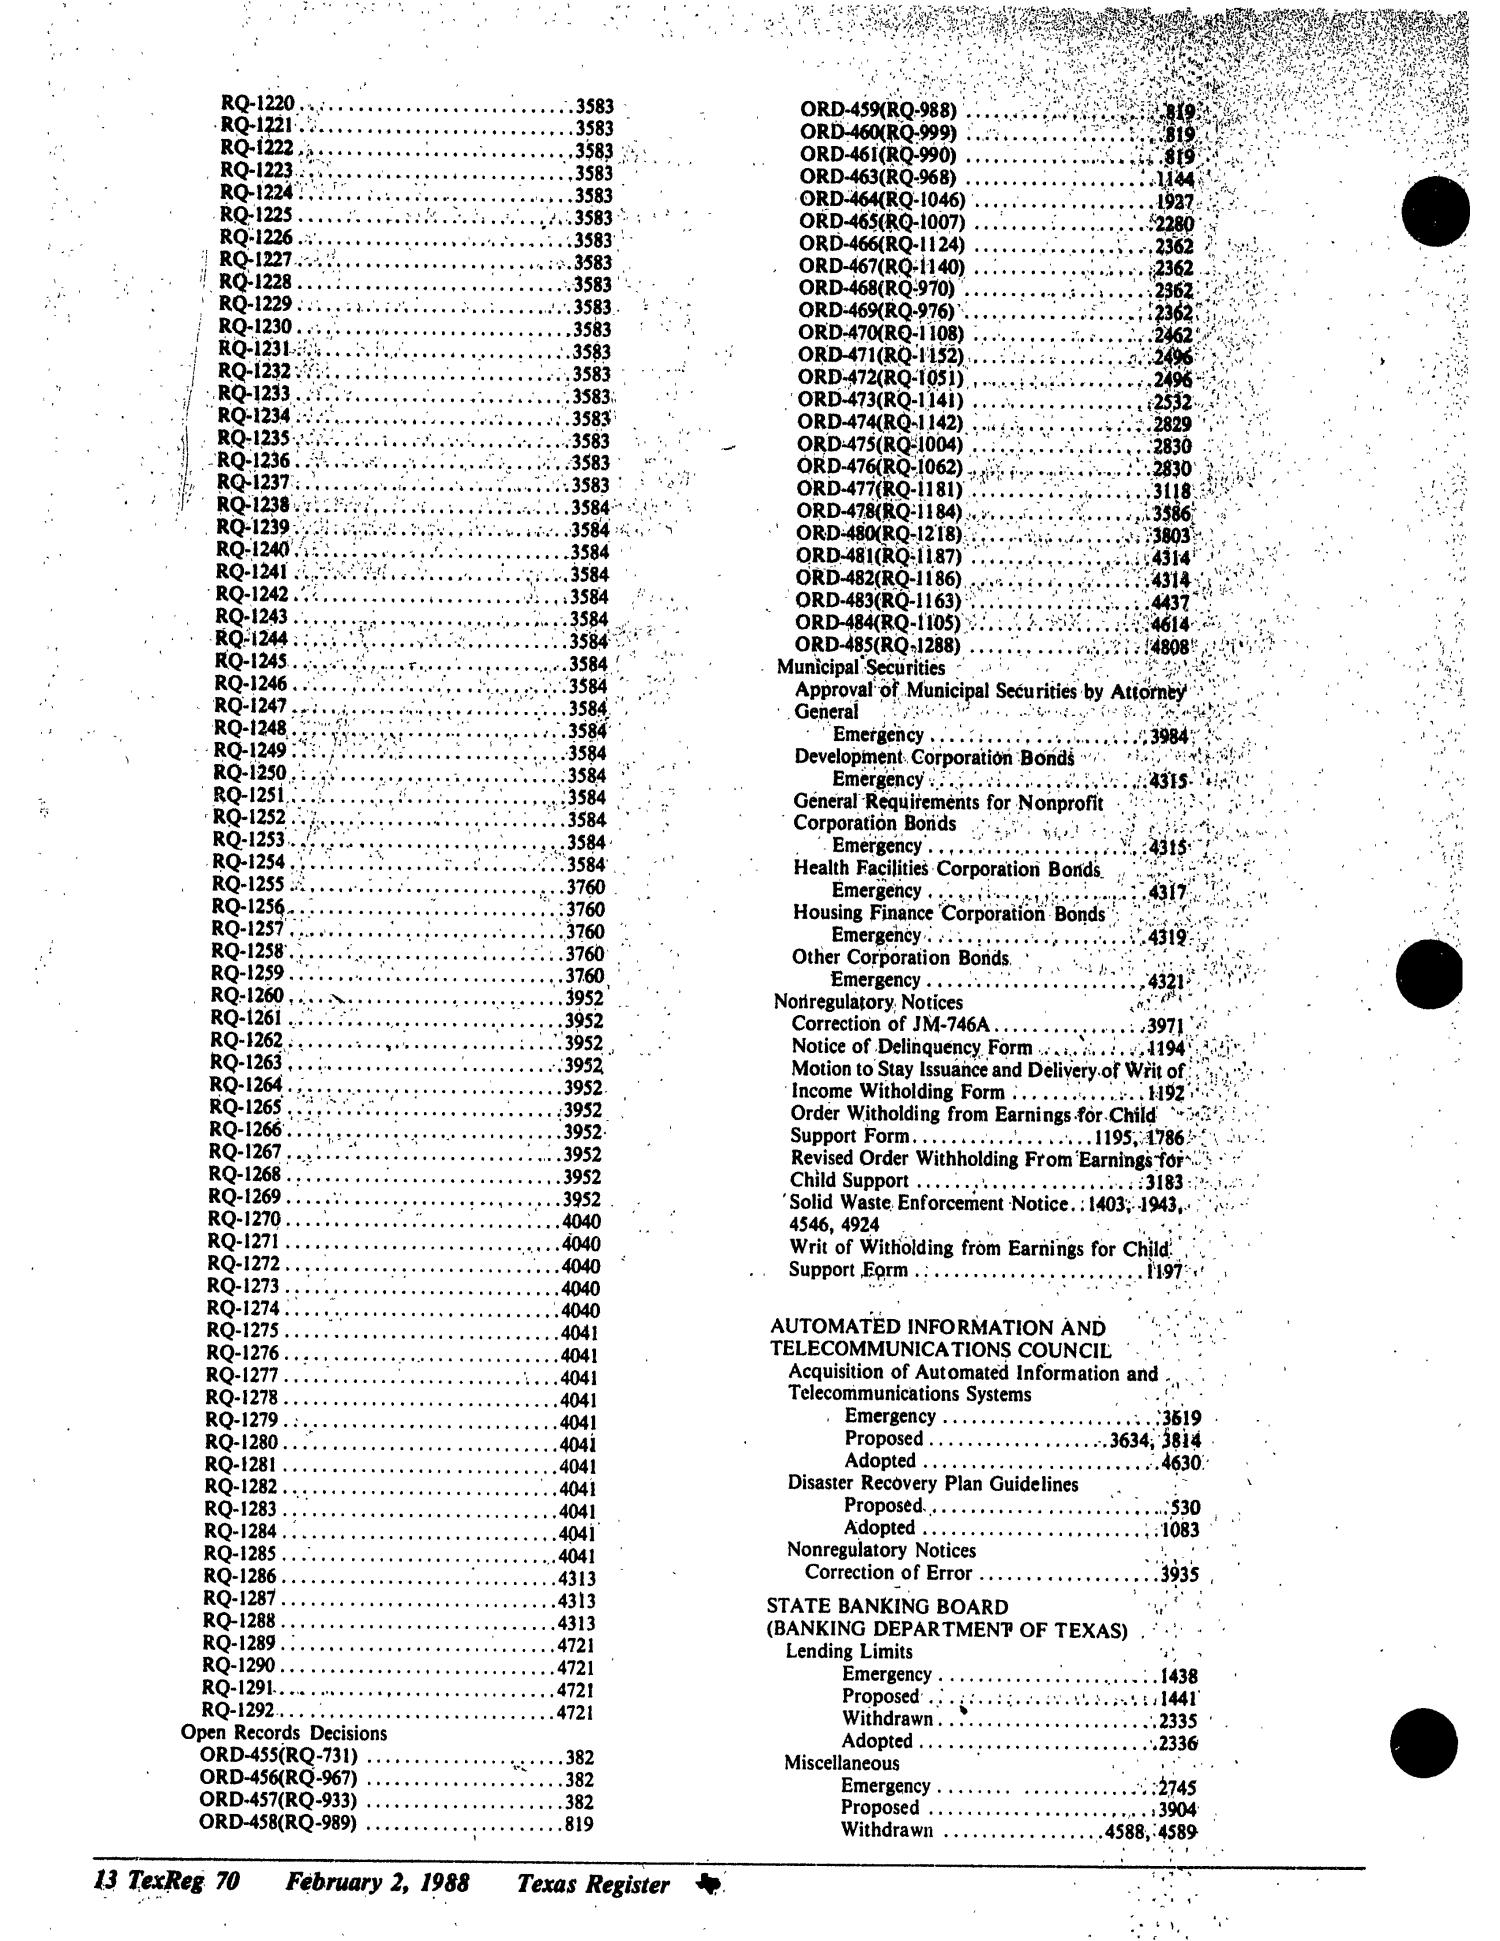 Texas Register: Annual Index January - December 1988, Volume 13 Numbers [1-96] - pages 225-350, February 3, 1989
                                                
                                                    70
                                                